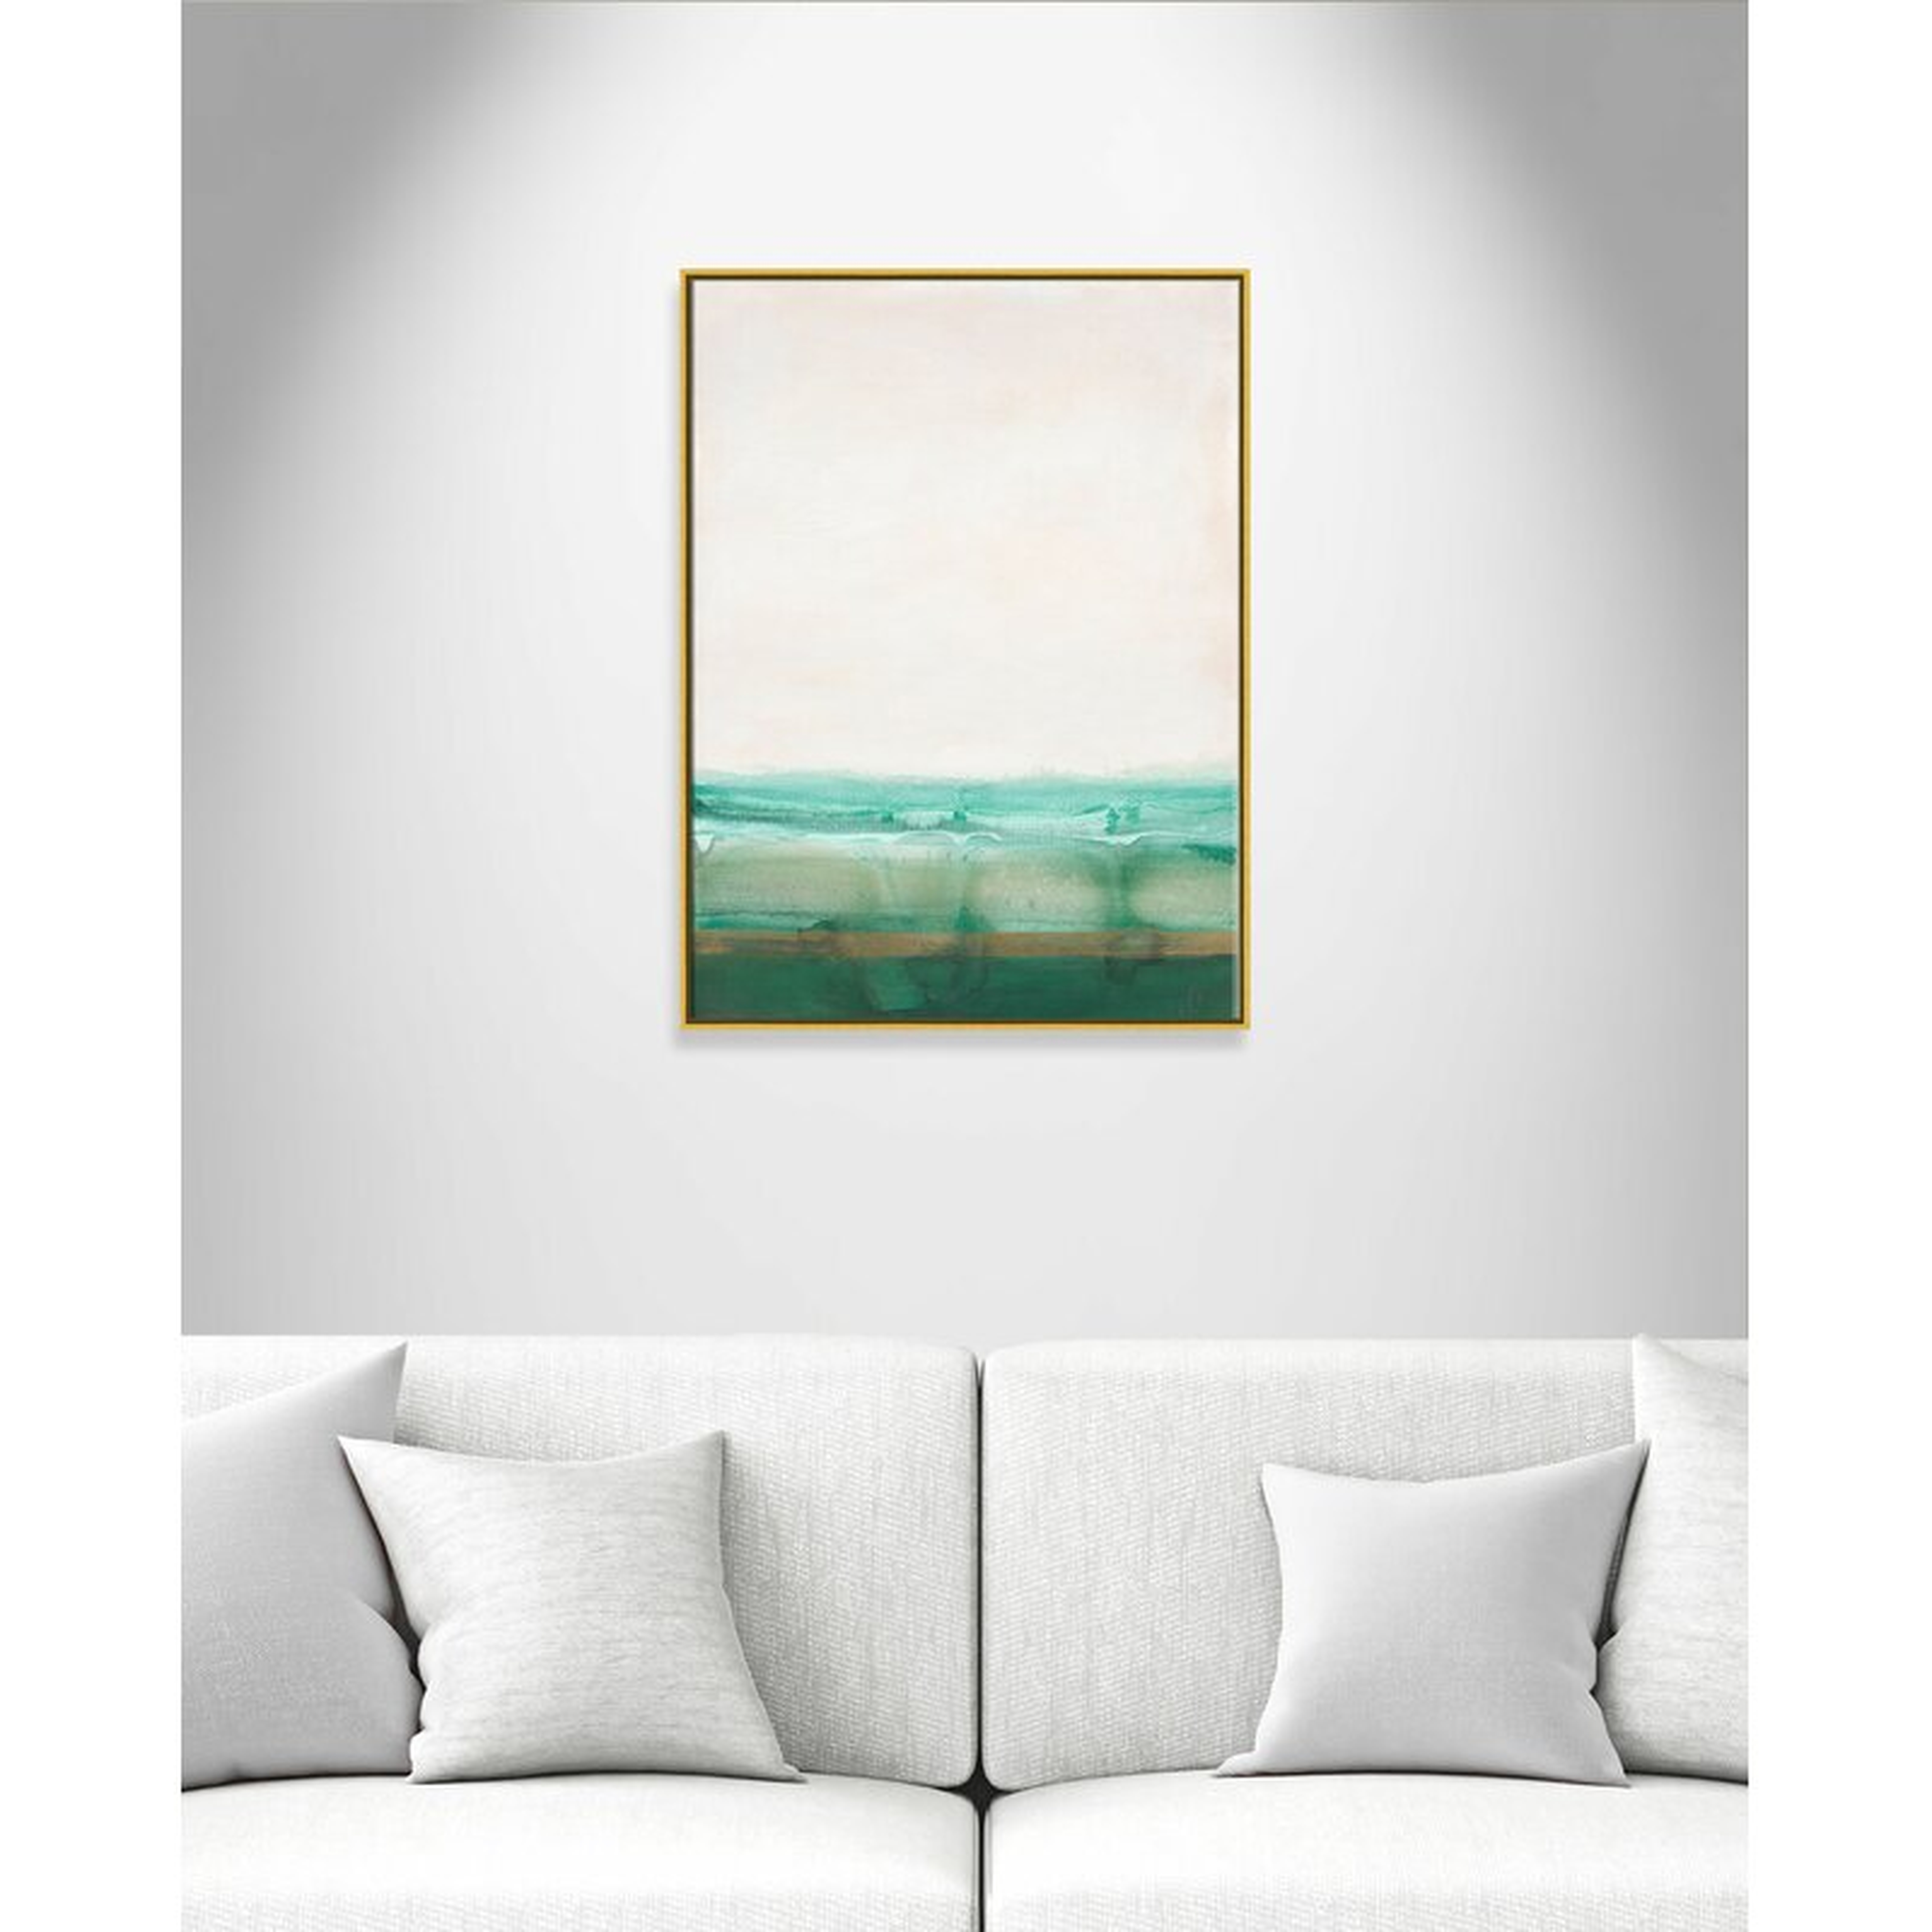 Casa Fine Arts 'Emerald Shores' Floater Frame Painting Print on Canvas Frame Color: Gold Framed, Size: 40" H x 30" W x 2" D - Perigold